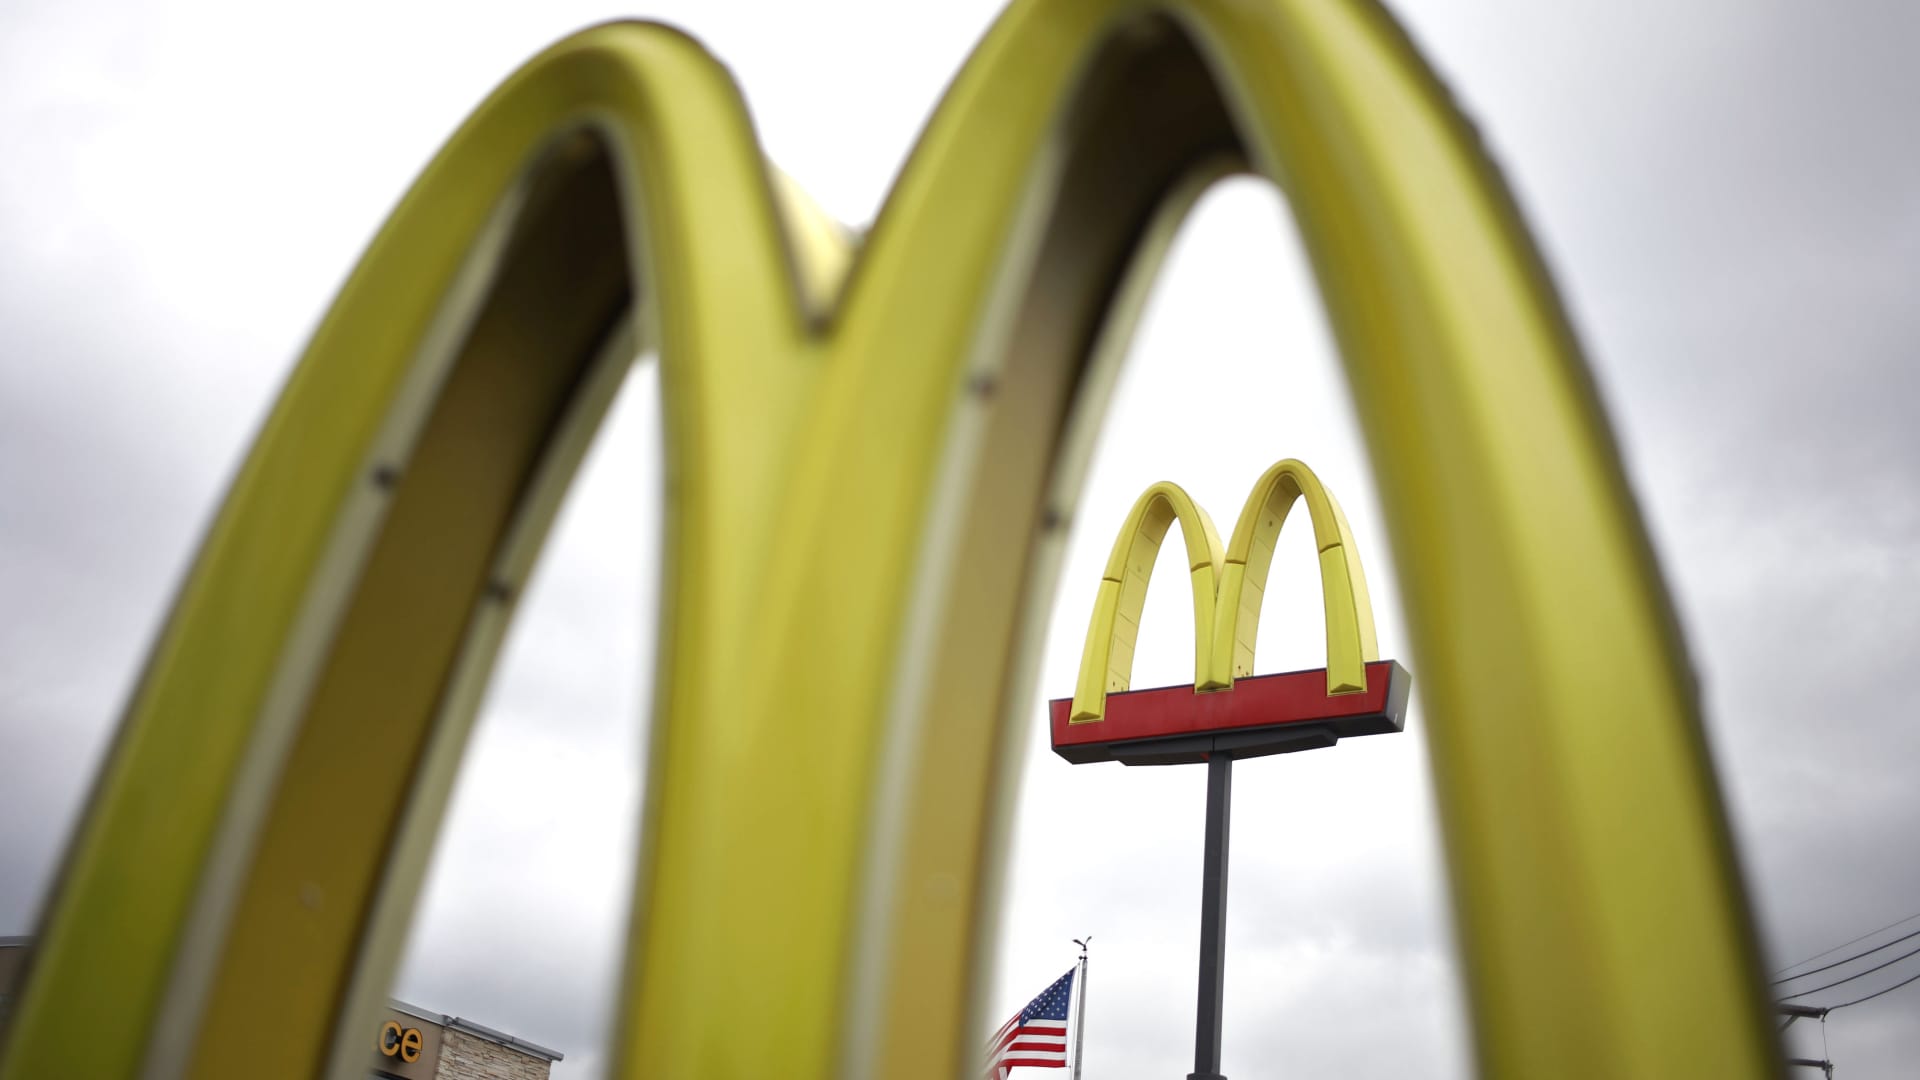 McDonald’s shareholders to vote on proxy fight with Carl Icahn over animal welfare practices – CNBC